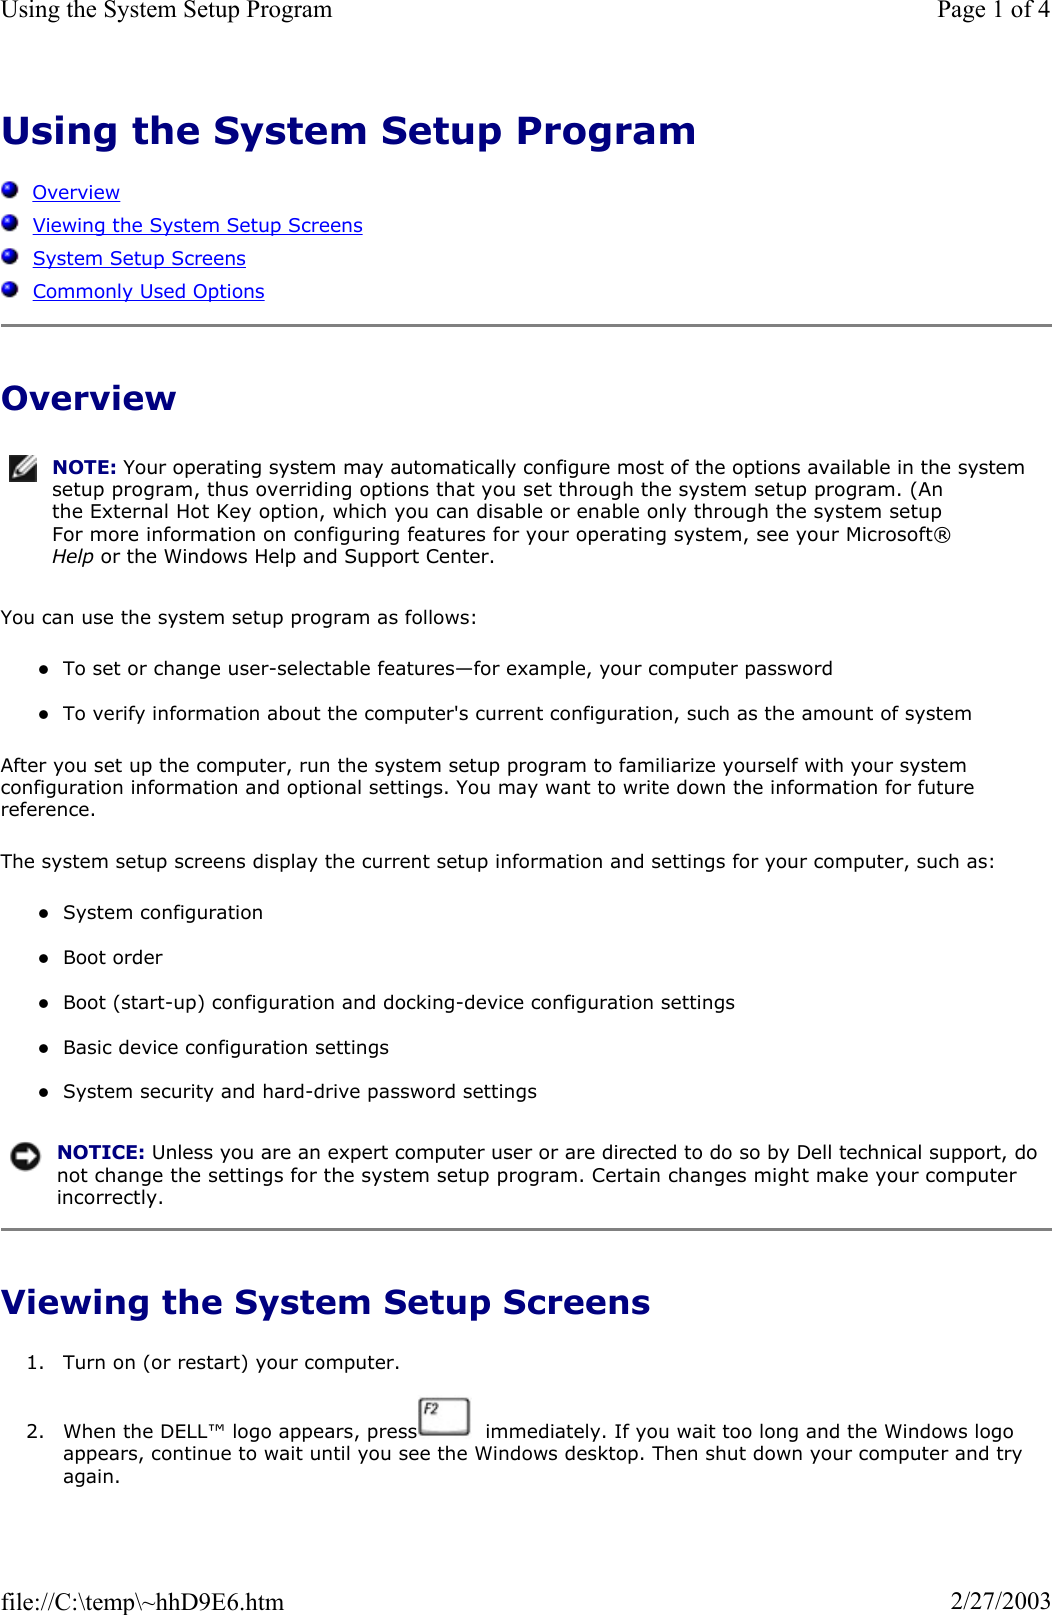 Using the System Setup ProgramOverviewViewing the System Setup ScreensSystem Setup ScreensCommonly Used OptionsOverview You can use the system setup program as follows: zTo set or change user-selectable features—for example, your computer password zTo verify information about the computer&apos;s current configuration, such as the amount of system After you set up the computer, run the system setup program to familiarize yourself with your system configuration information and optional settings. You may want to write down the information for future reference.The system setup screens display the current setup information and settings for your computer, such as: zSystem configuration zBoot order zBoot (start-up) configuration and docking-device configuration settings zBasic device configuration settings zSystem security and hard-drive password settings Viewing the System Setup Screens 1. Turn on (or restart) your computer. 2. When the DELL™ logo appears, press   immediately. If you wait too long and the Windows logo appears, continue to wait until you see the Windows desktop. Then shut down your computer and try again.NOTE: Your operating system may automatically configure most of the options available in the system setup program, thus overriding options that you set through the system setup program. (An the External Hot Key option, which you can disable or enable only through the system setup For more information on configuring features for your operating system, see your Microsoft® Help or the Windows Help and Support Center.NOTICE: Unless you are an expert computer user or are directed to do so by Dell technical support, do not change the settings for the system setup program. Certain changes might make your computer incorrectly. Page 1 of 4Using the System Setup Program2/27/2003file://C:\temp\~hhD9E6.htm